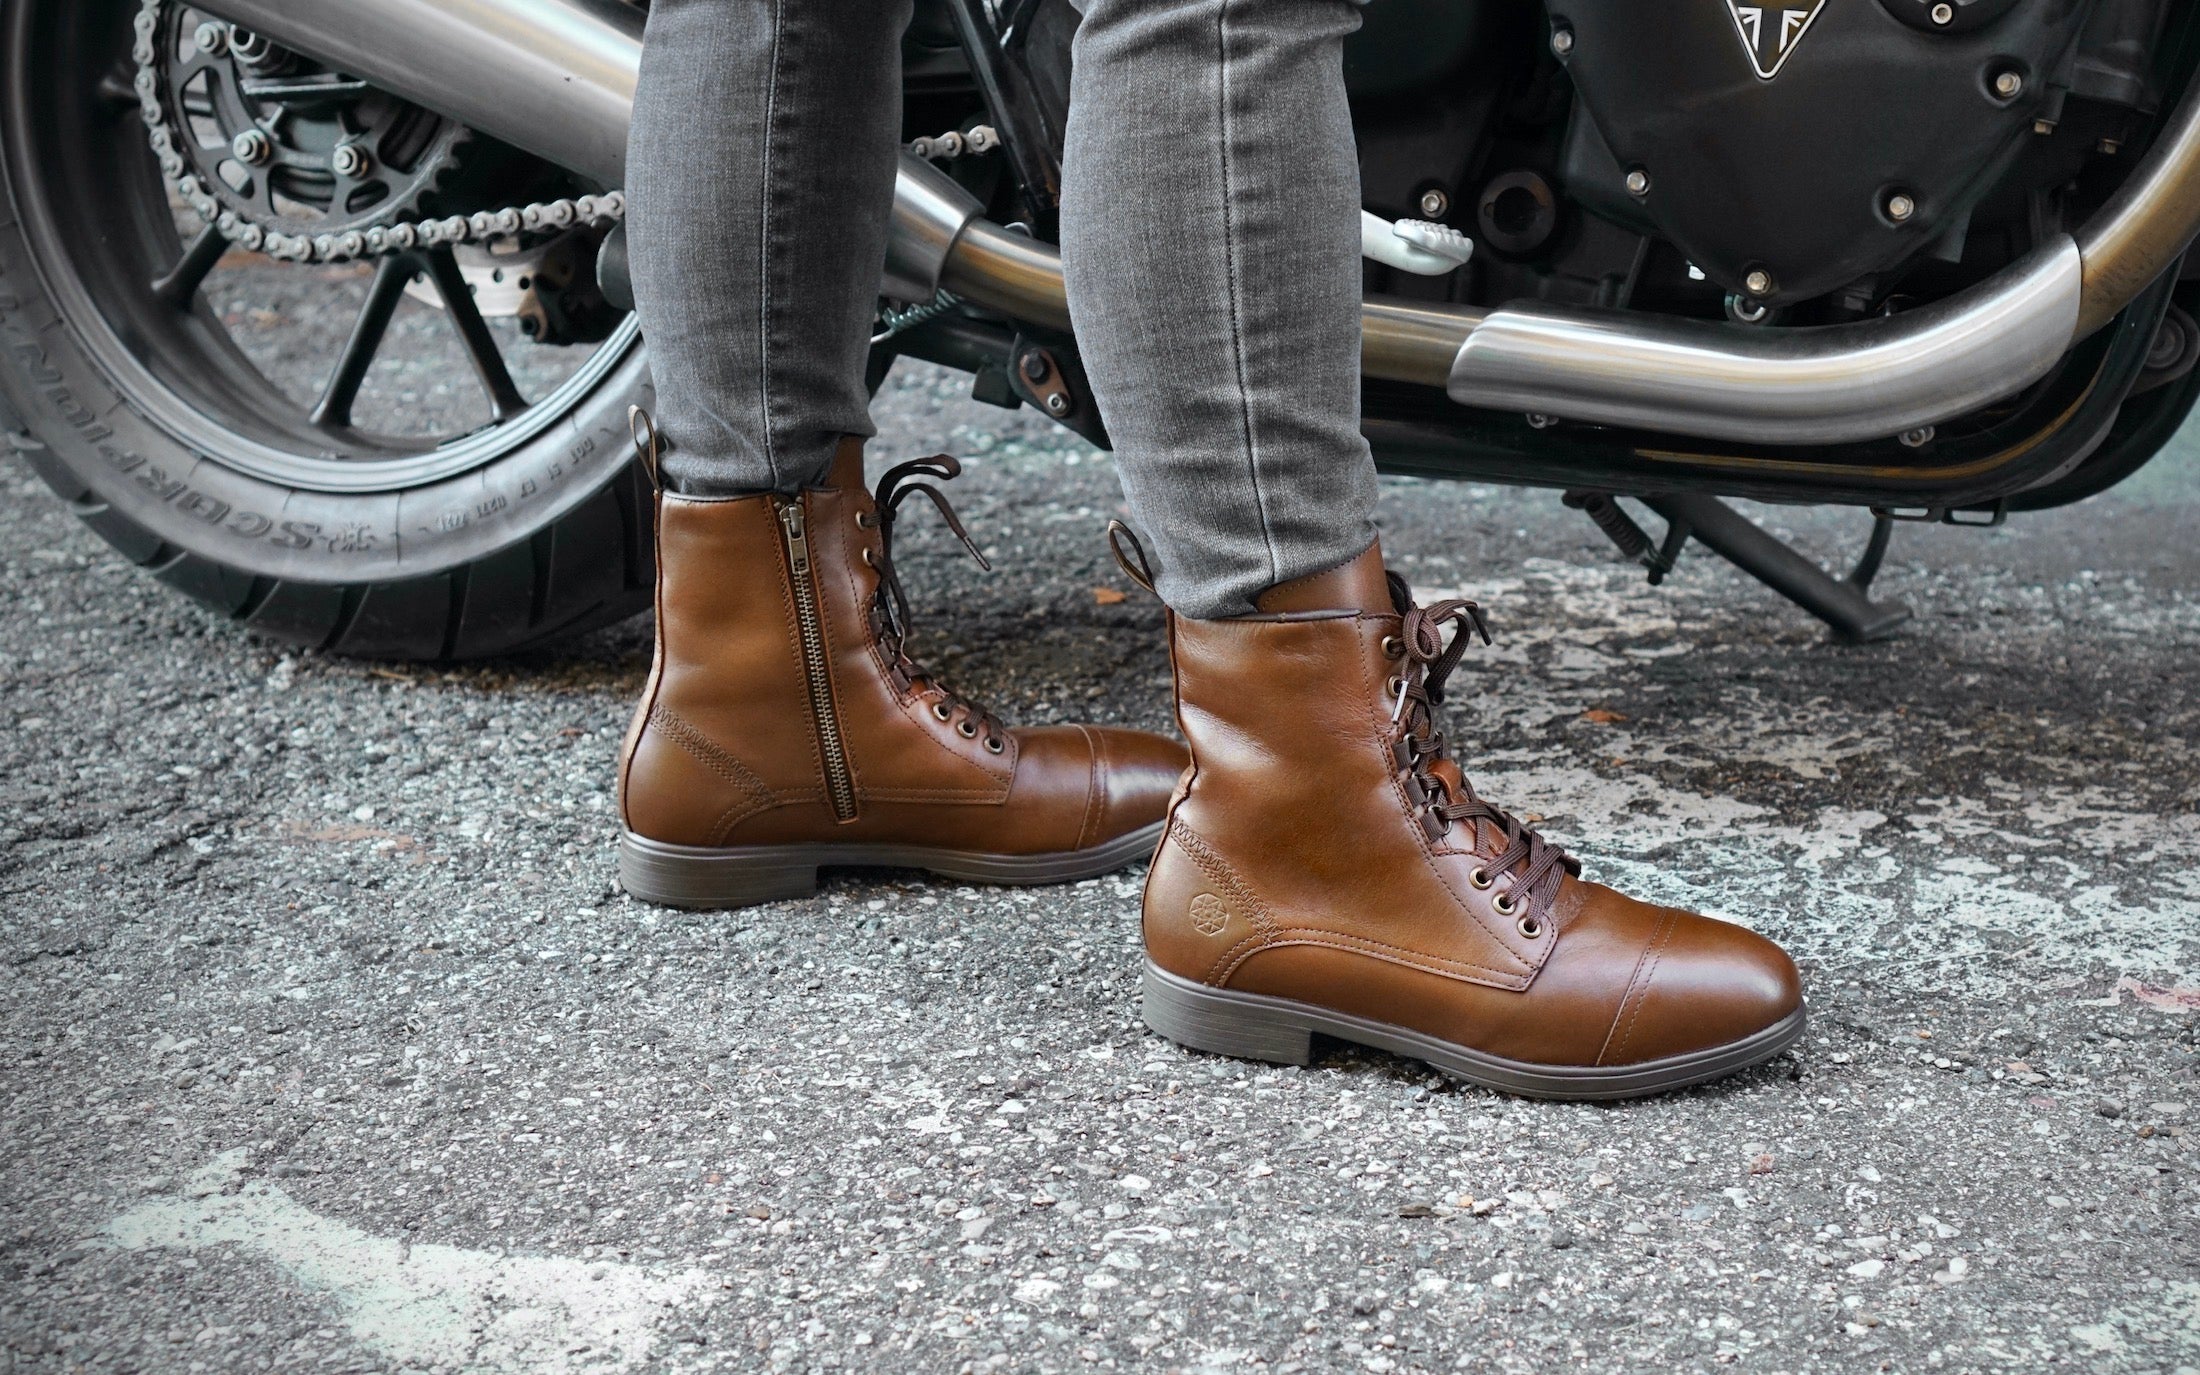 Spice Steel-Toe Safety Combat Motorcycle Boot | Designed for Women by Women | ASTM Certified, Featuring Lace-Ups, and Side Zipper | Full Grain Mystic Dune Leather | Xena Workwear